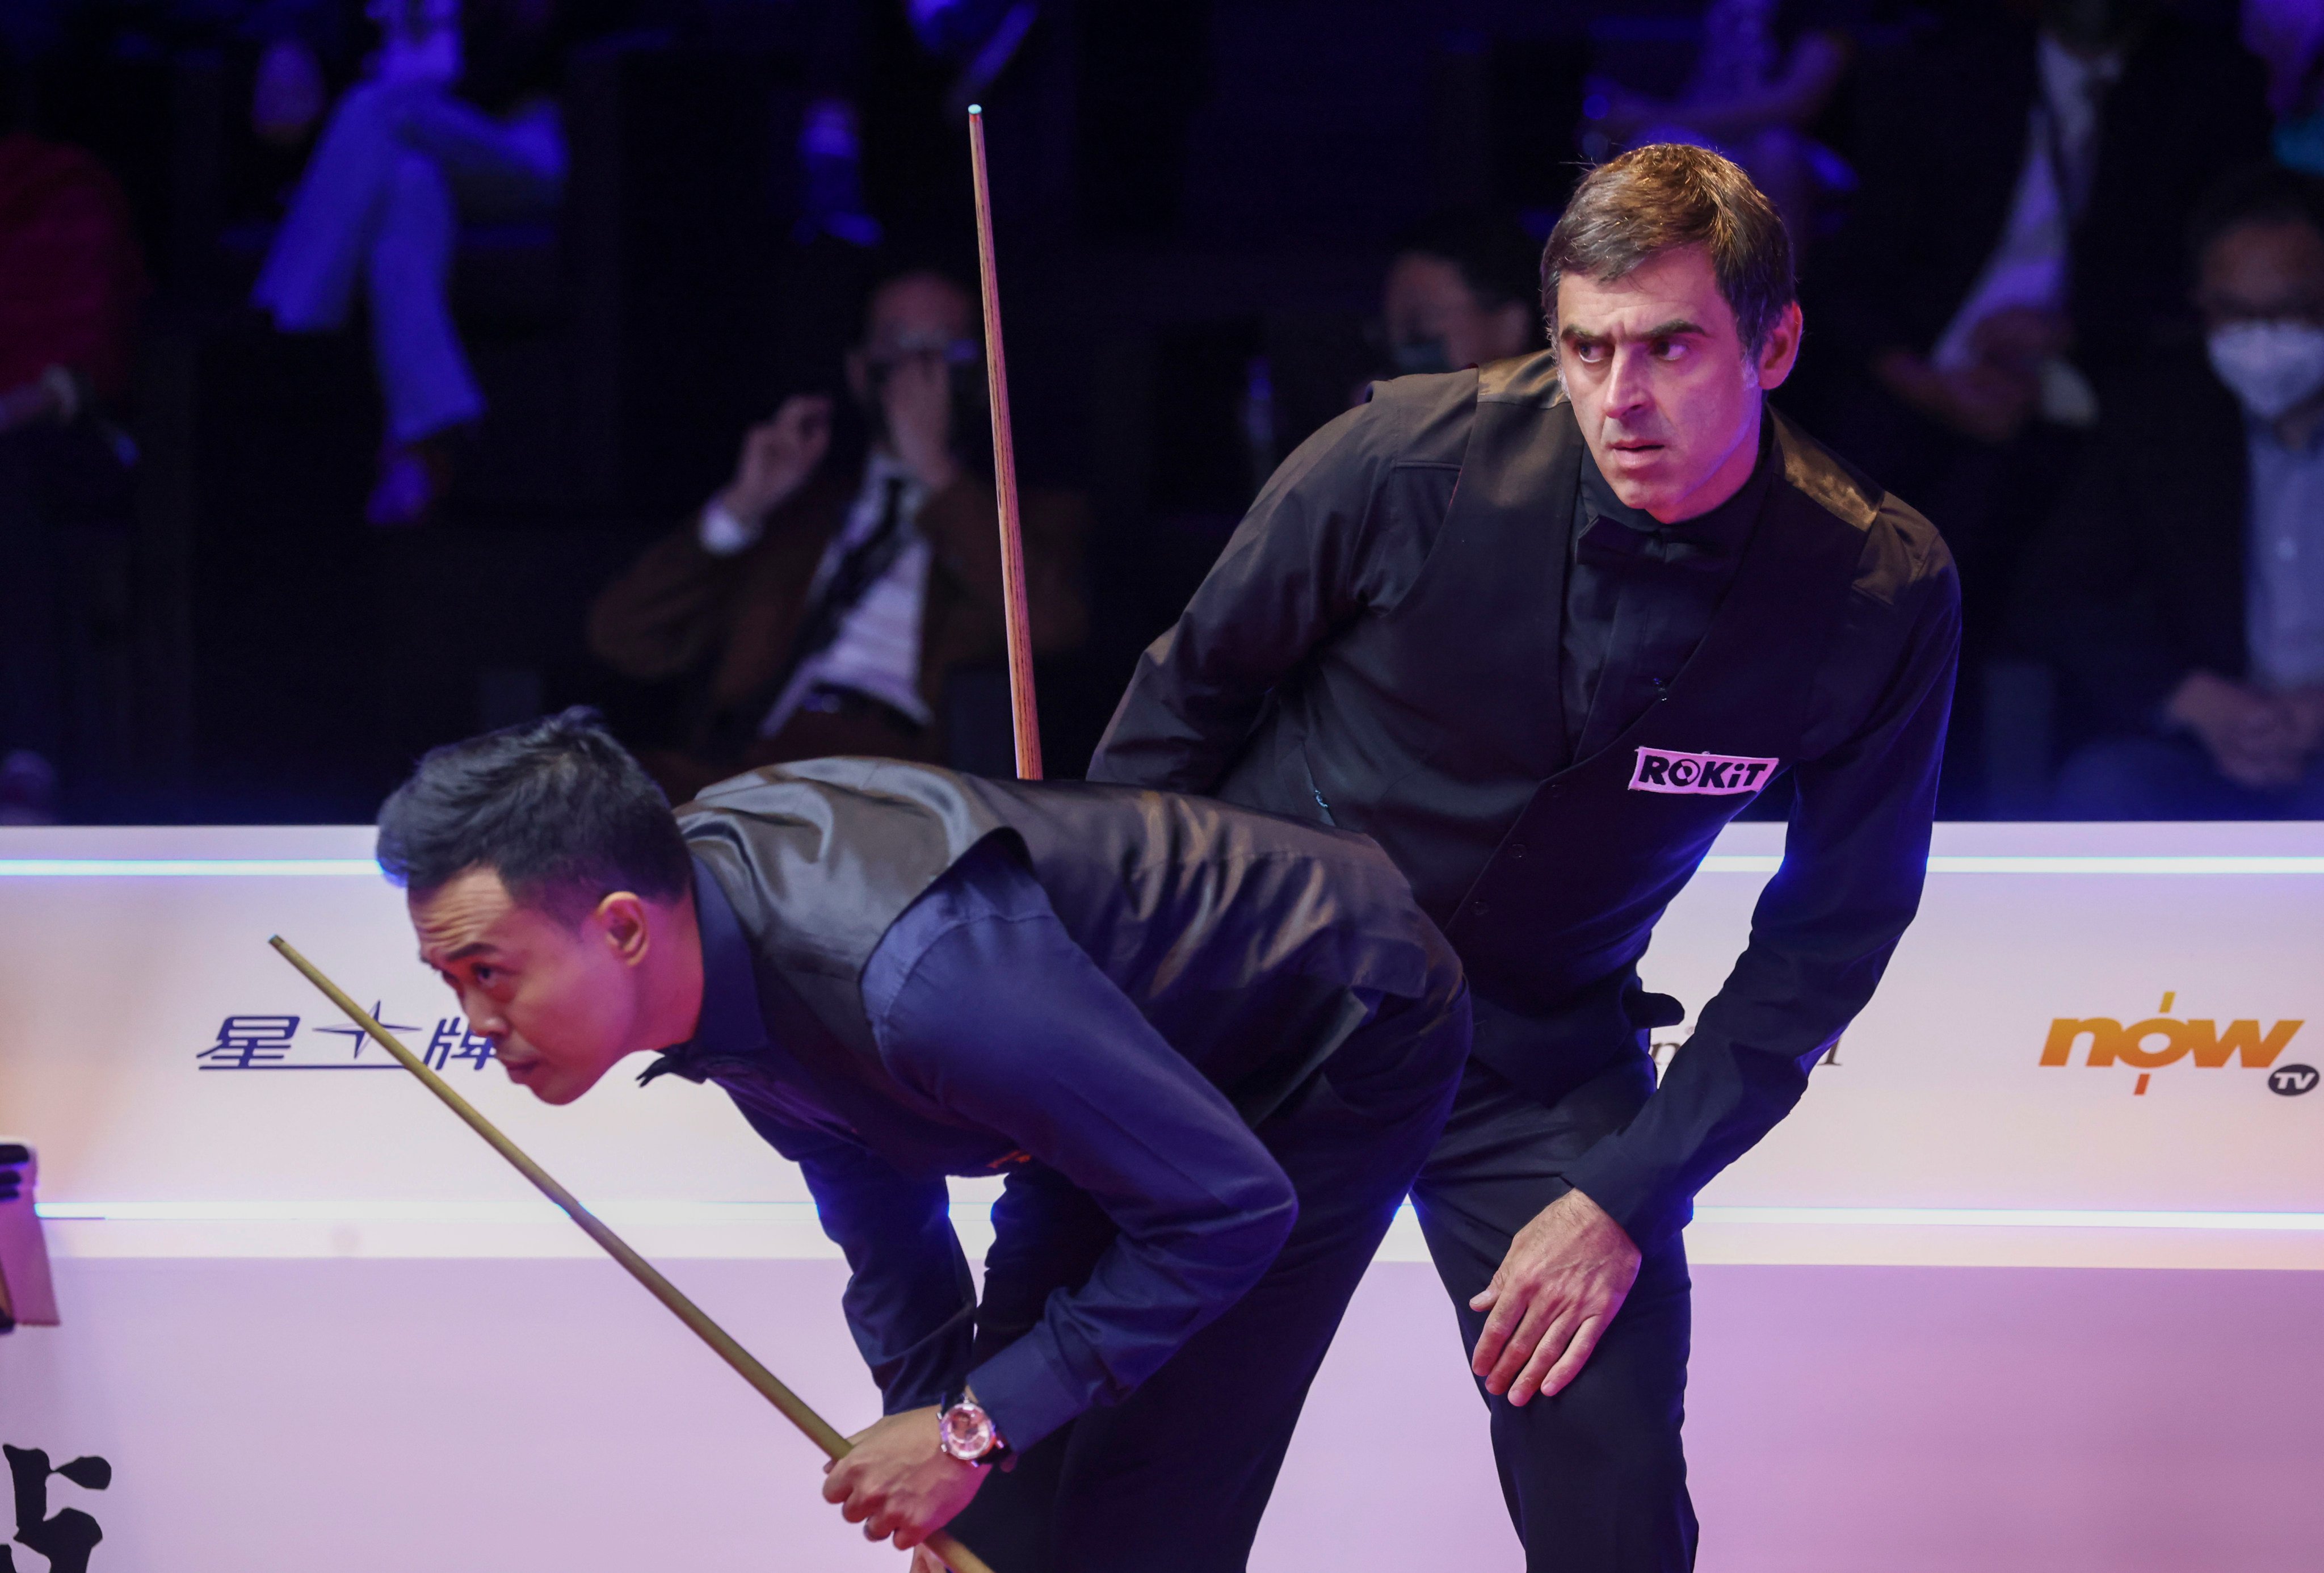 The last international event hosted by the HKBSCC was the Hong Kong Masters exhibition event in 2022, which saw Ronnie O’Sullivan beat Marco Fu 6-4 in the final at the Hong Kong Coliseum. Photo: K. Y. Cheng